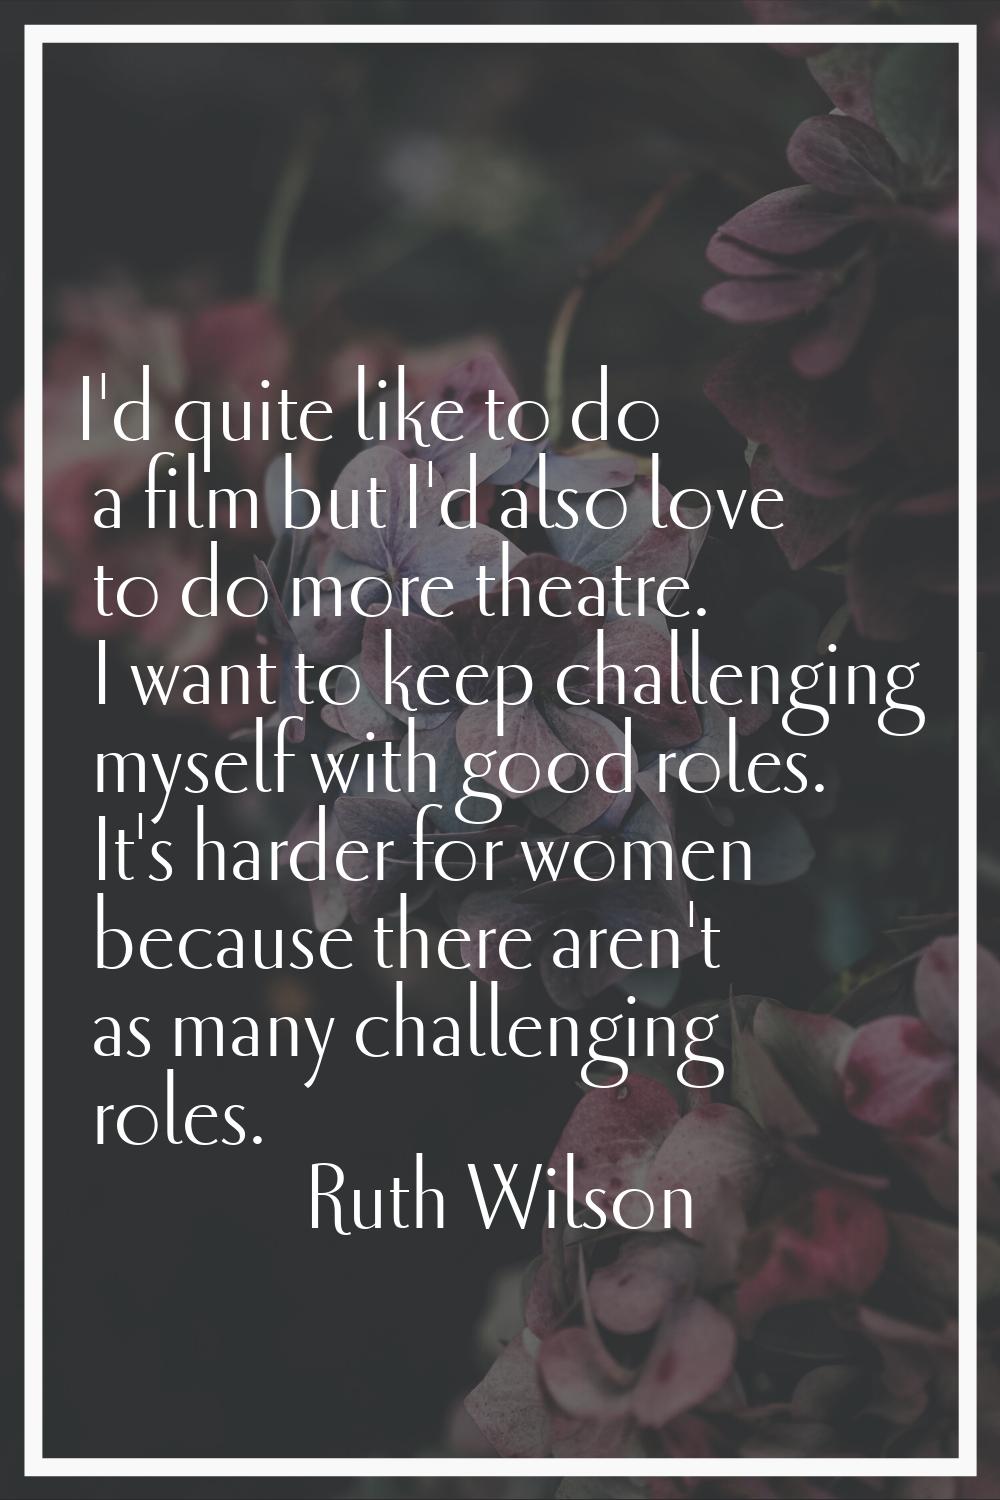 I'd quite like to do a film but I'd also love to do more theatre. I want to keep challenging myself